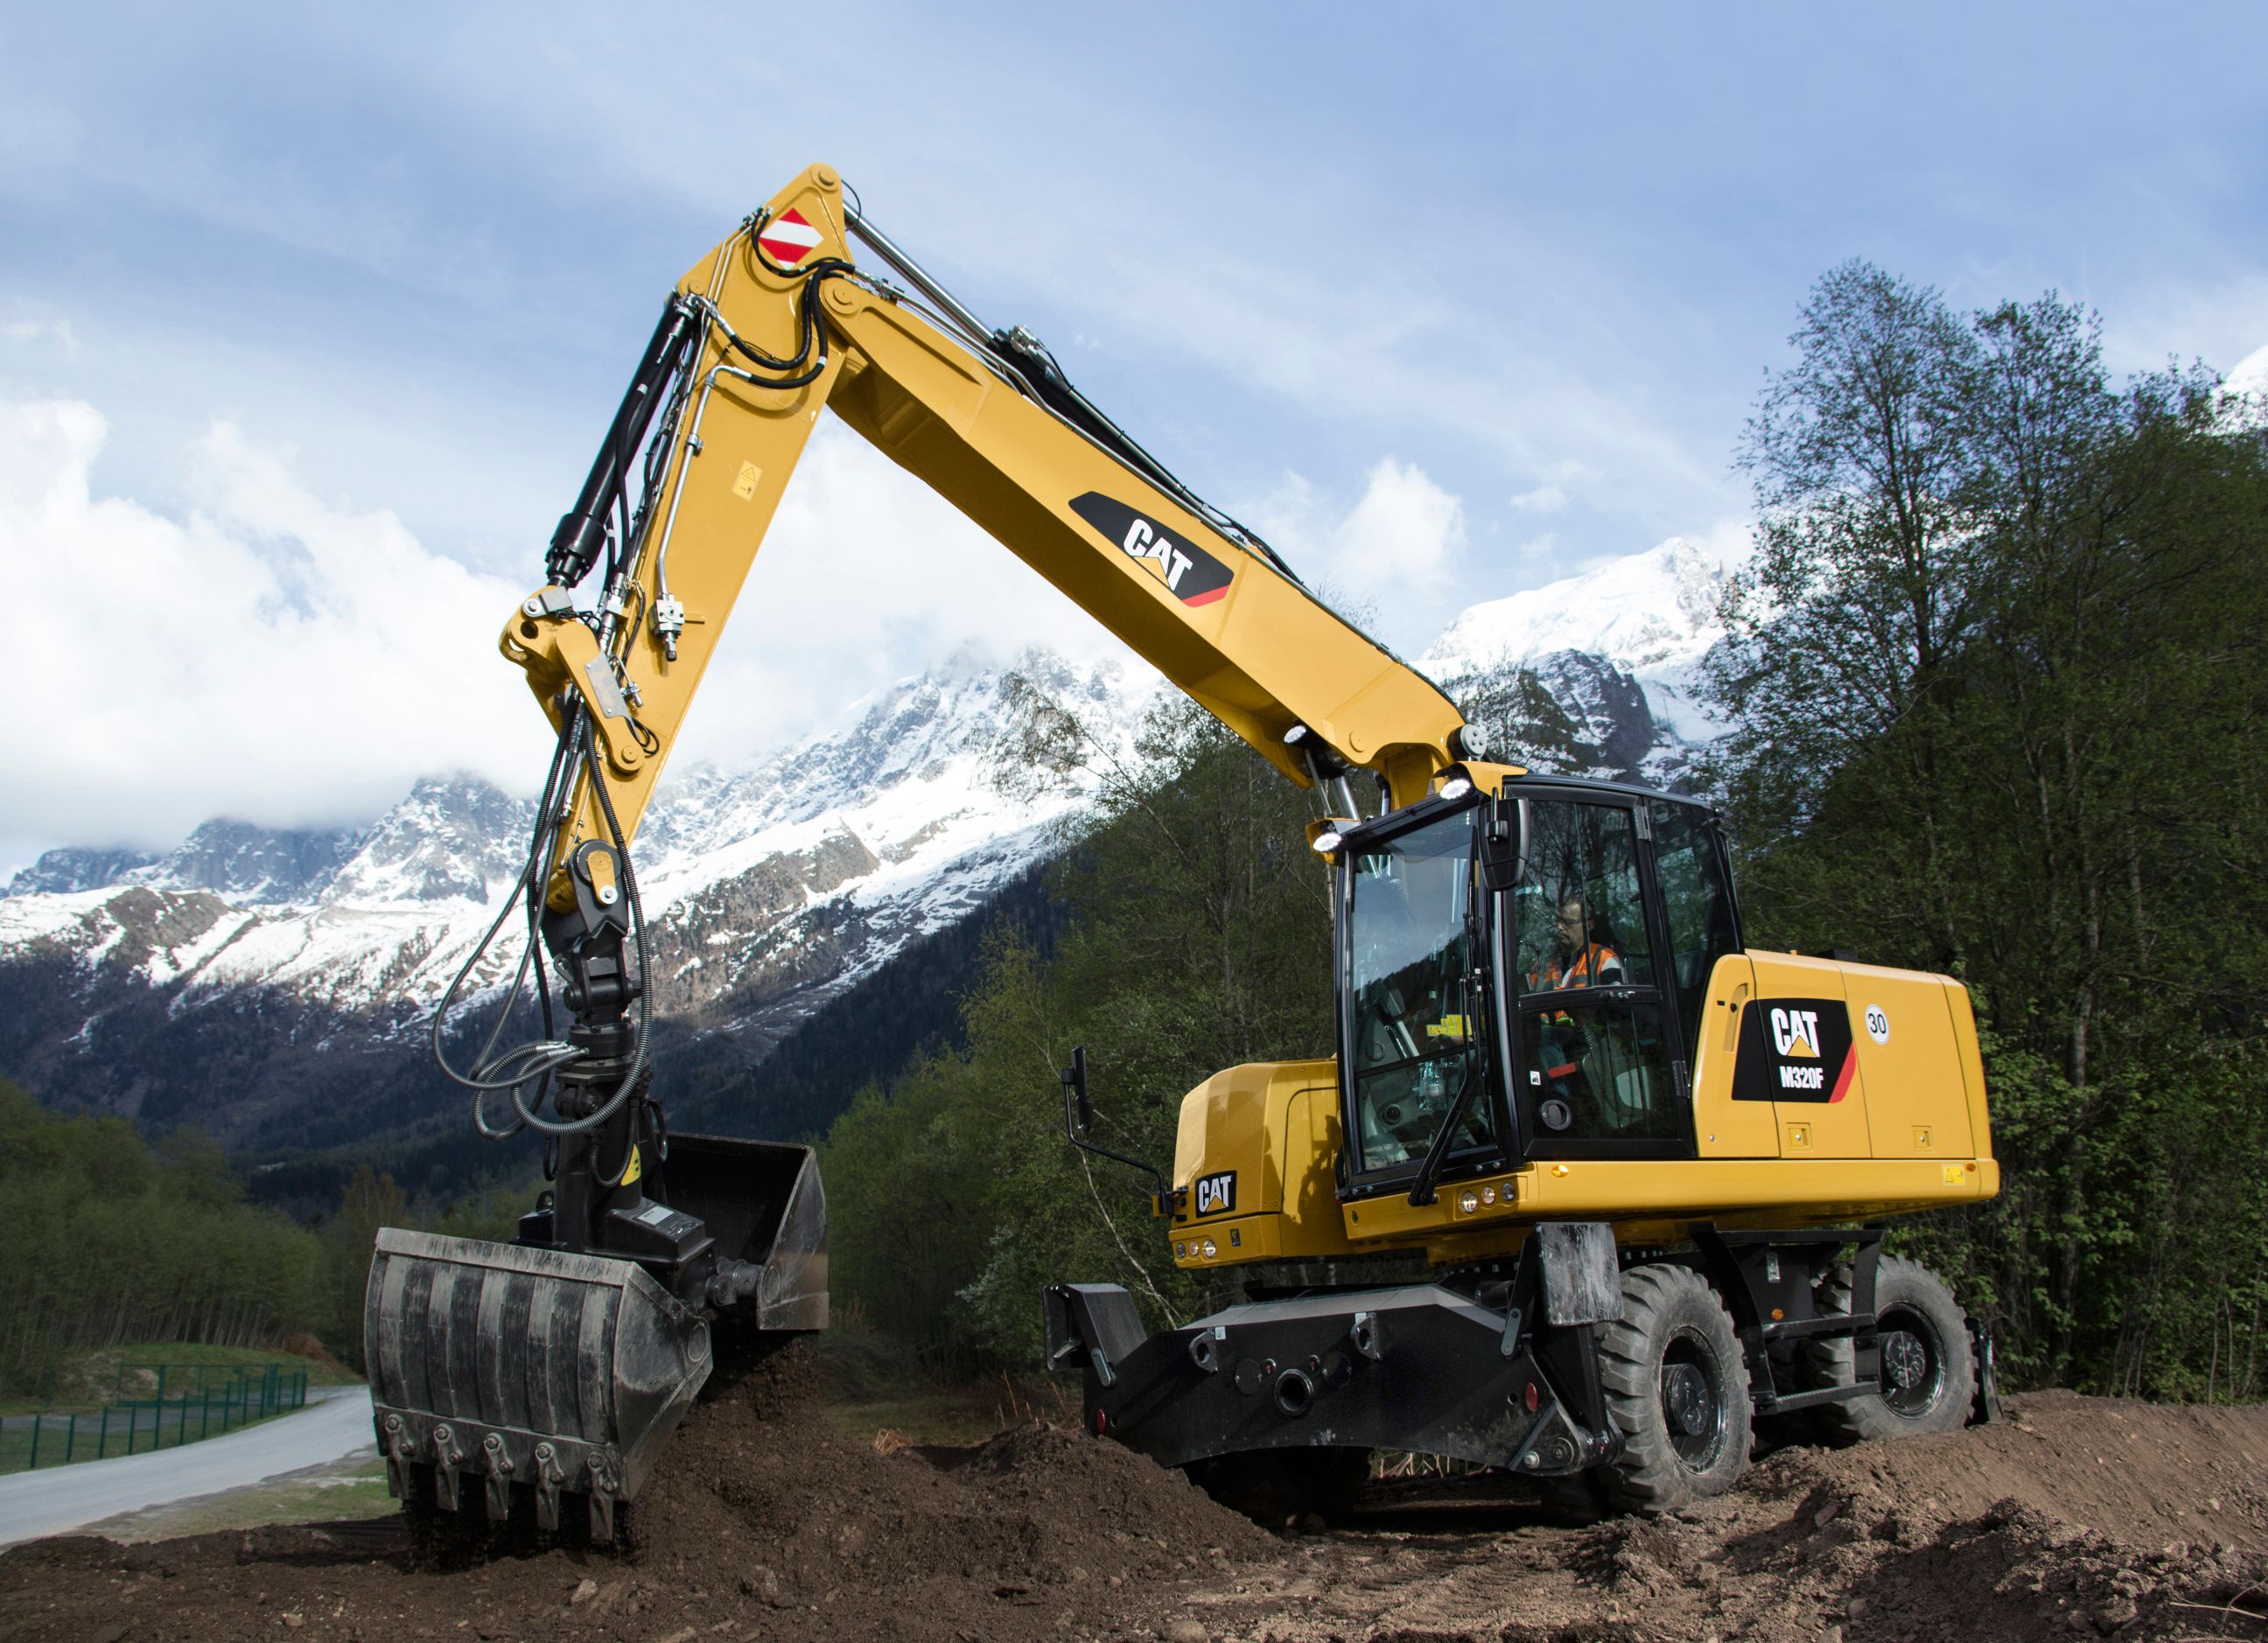 Visit Us Online to Learn More About Cat® Excavators